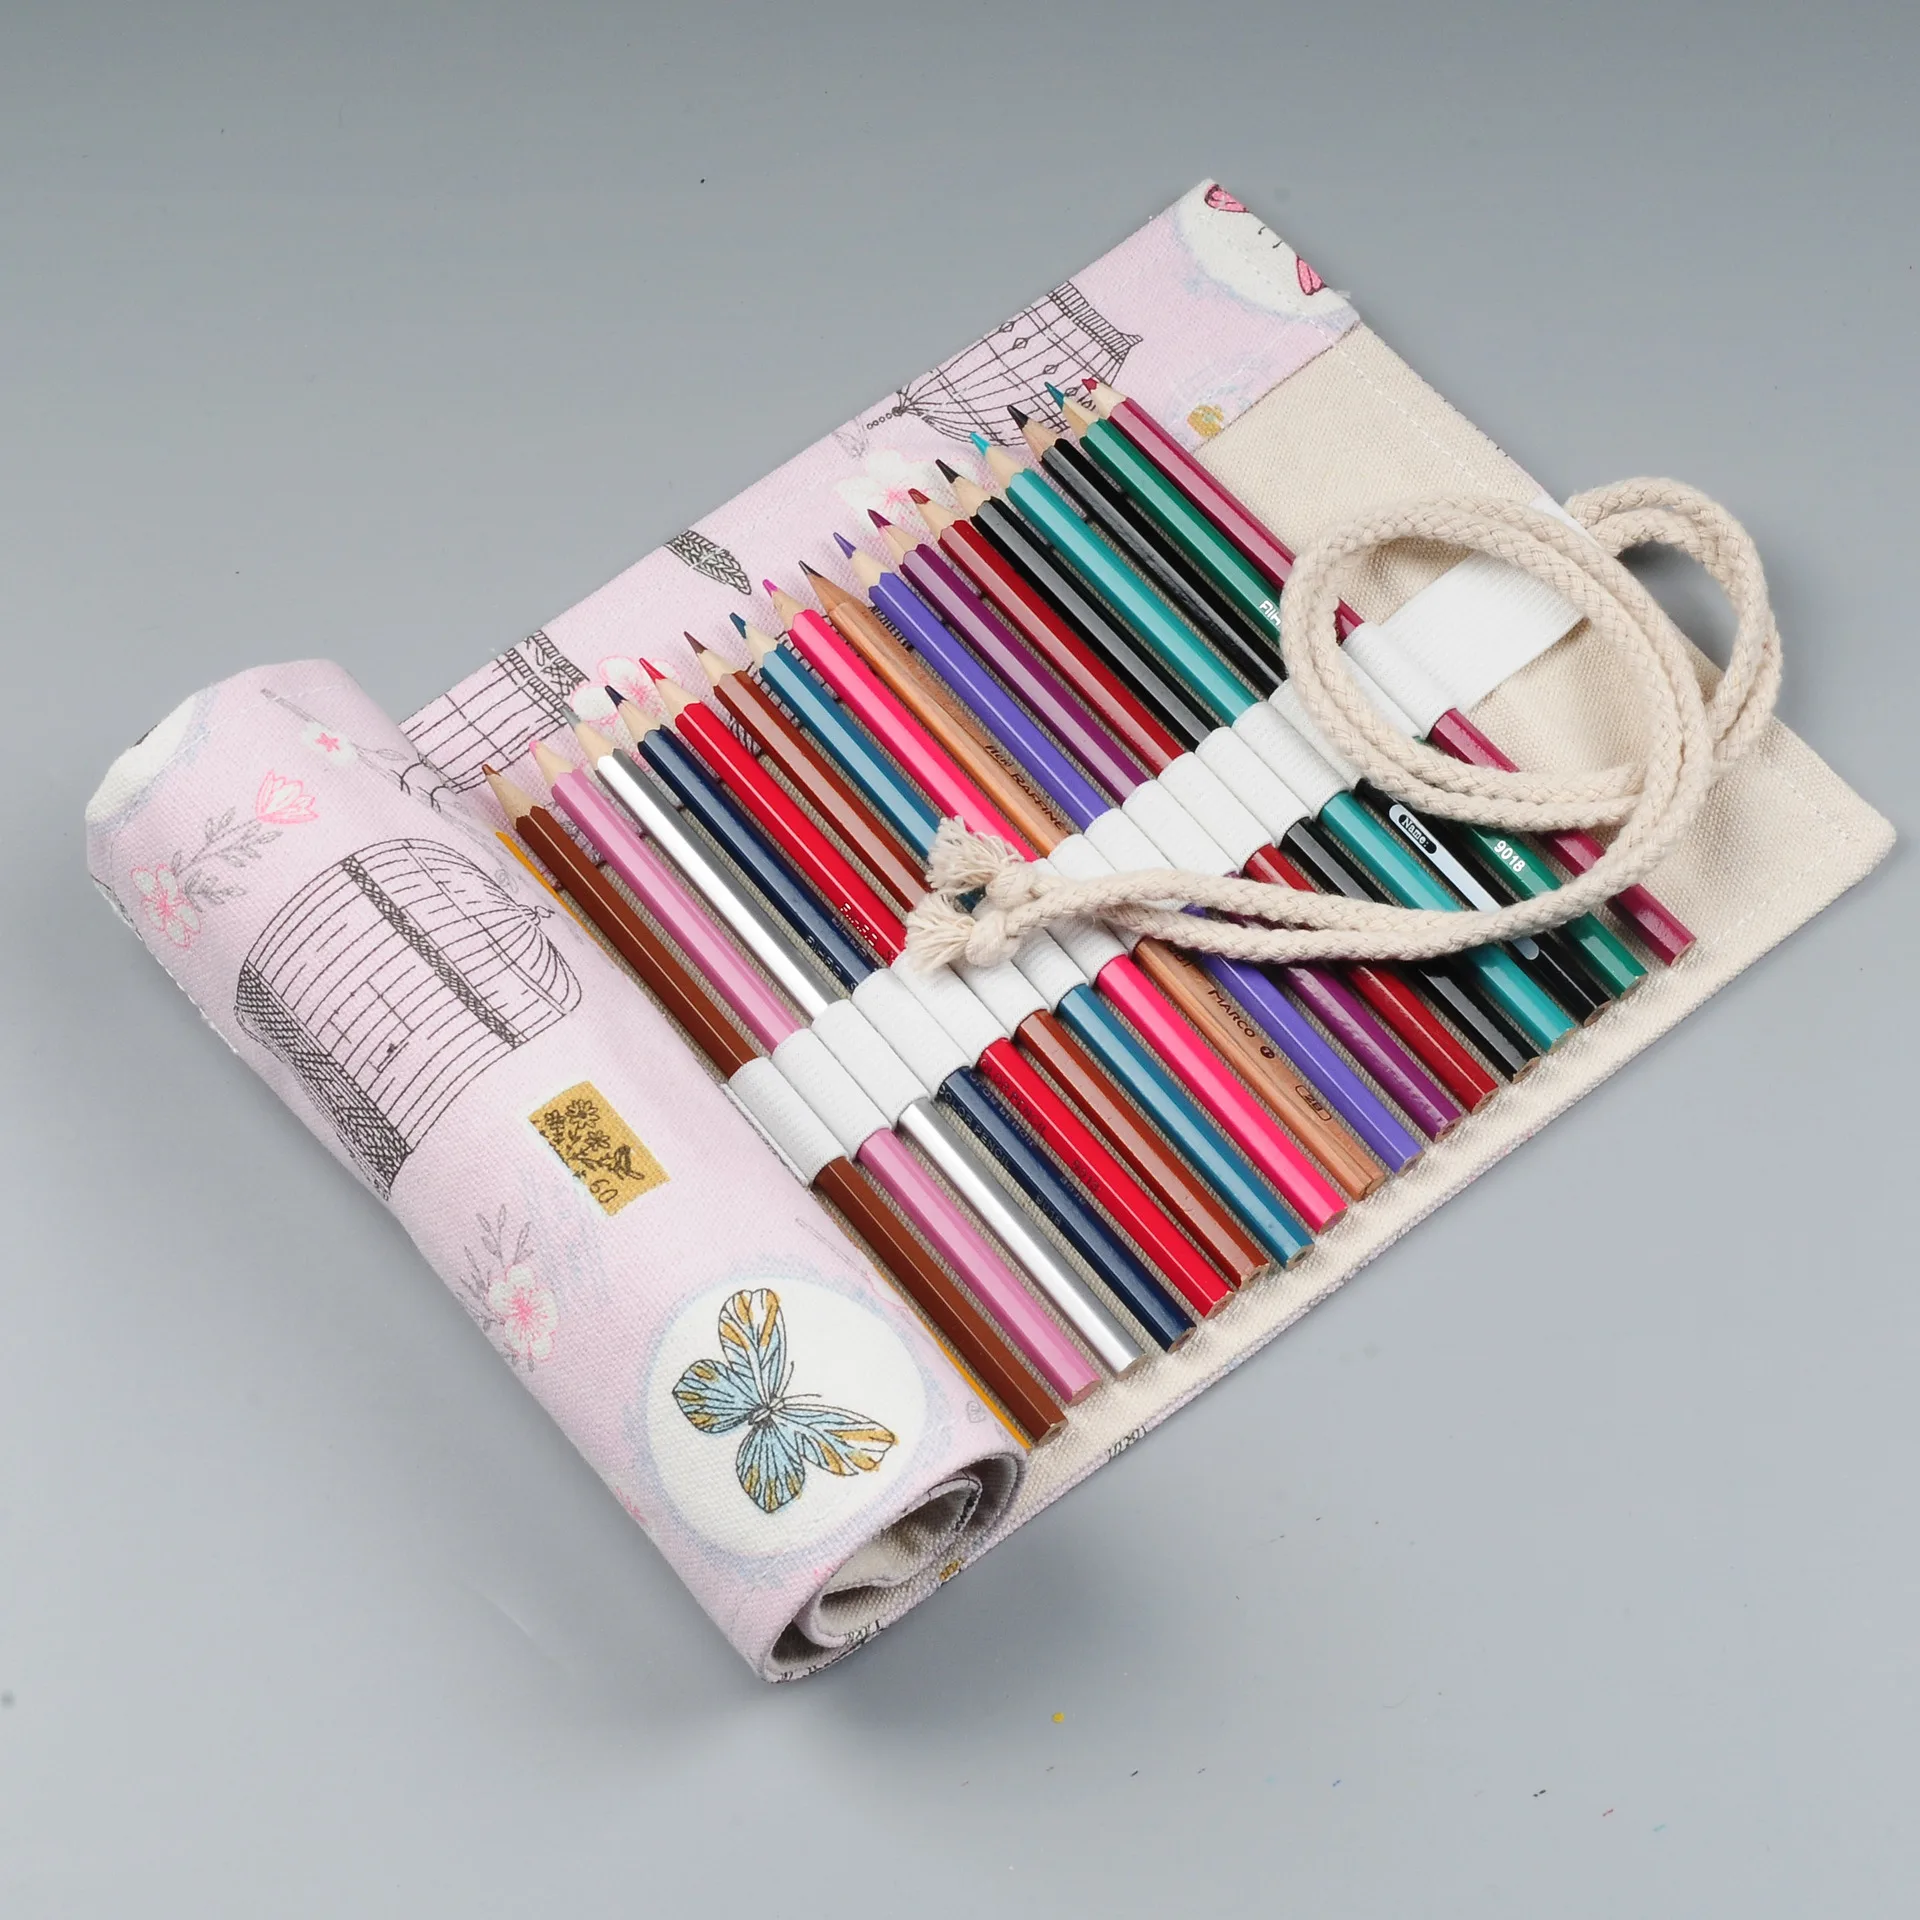 24/36/48/72 Holes Bird Canvas Roll Up Colored Pencil Cases Pencil Wrap Makeup Brush Holder Storage Pouch School Supplies